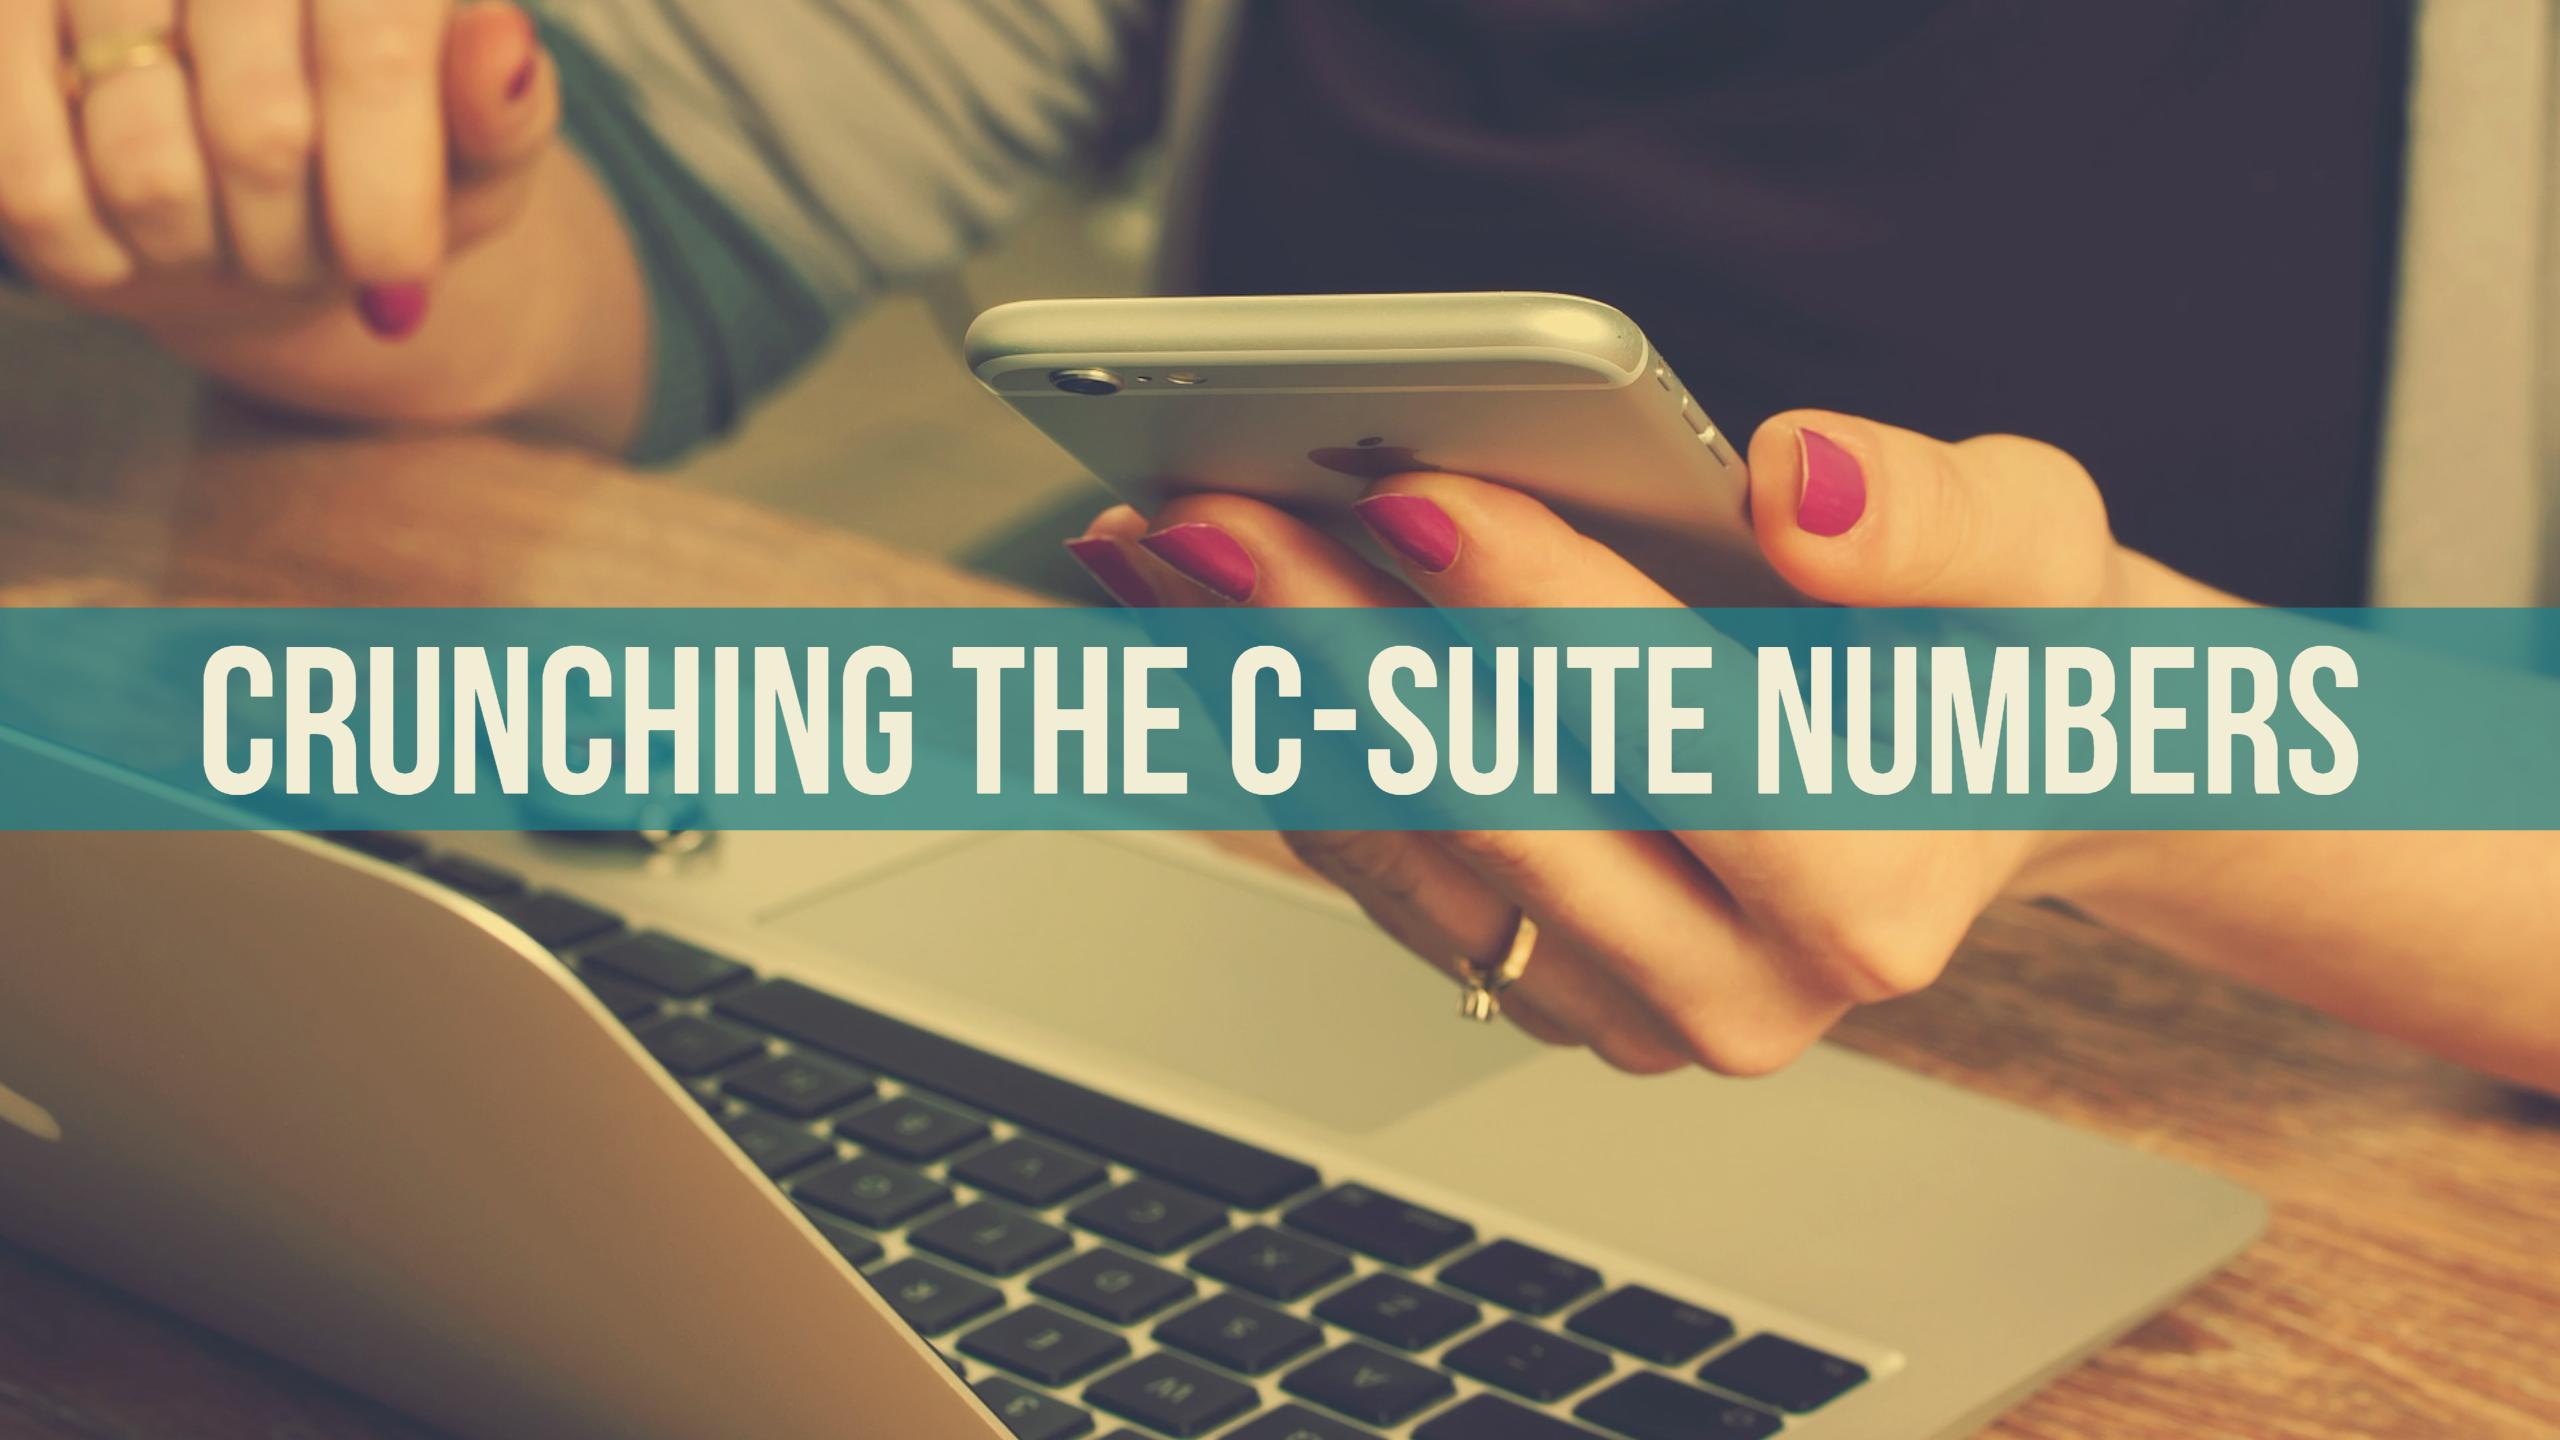 Crunching the C-Suite Numbers